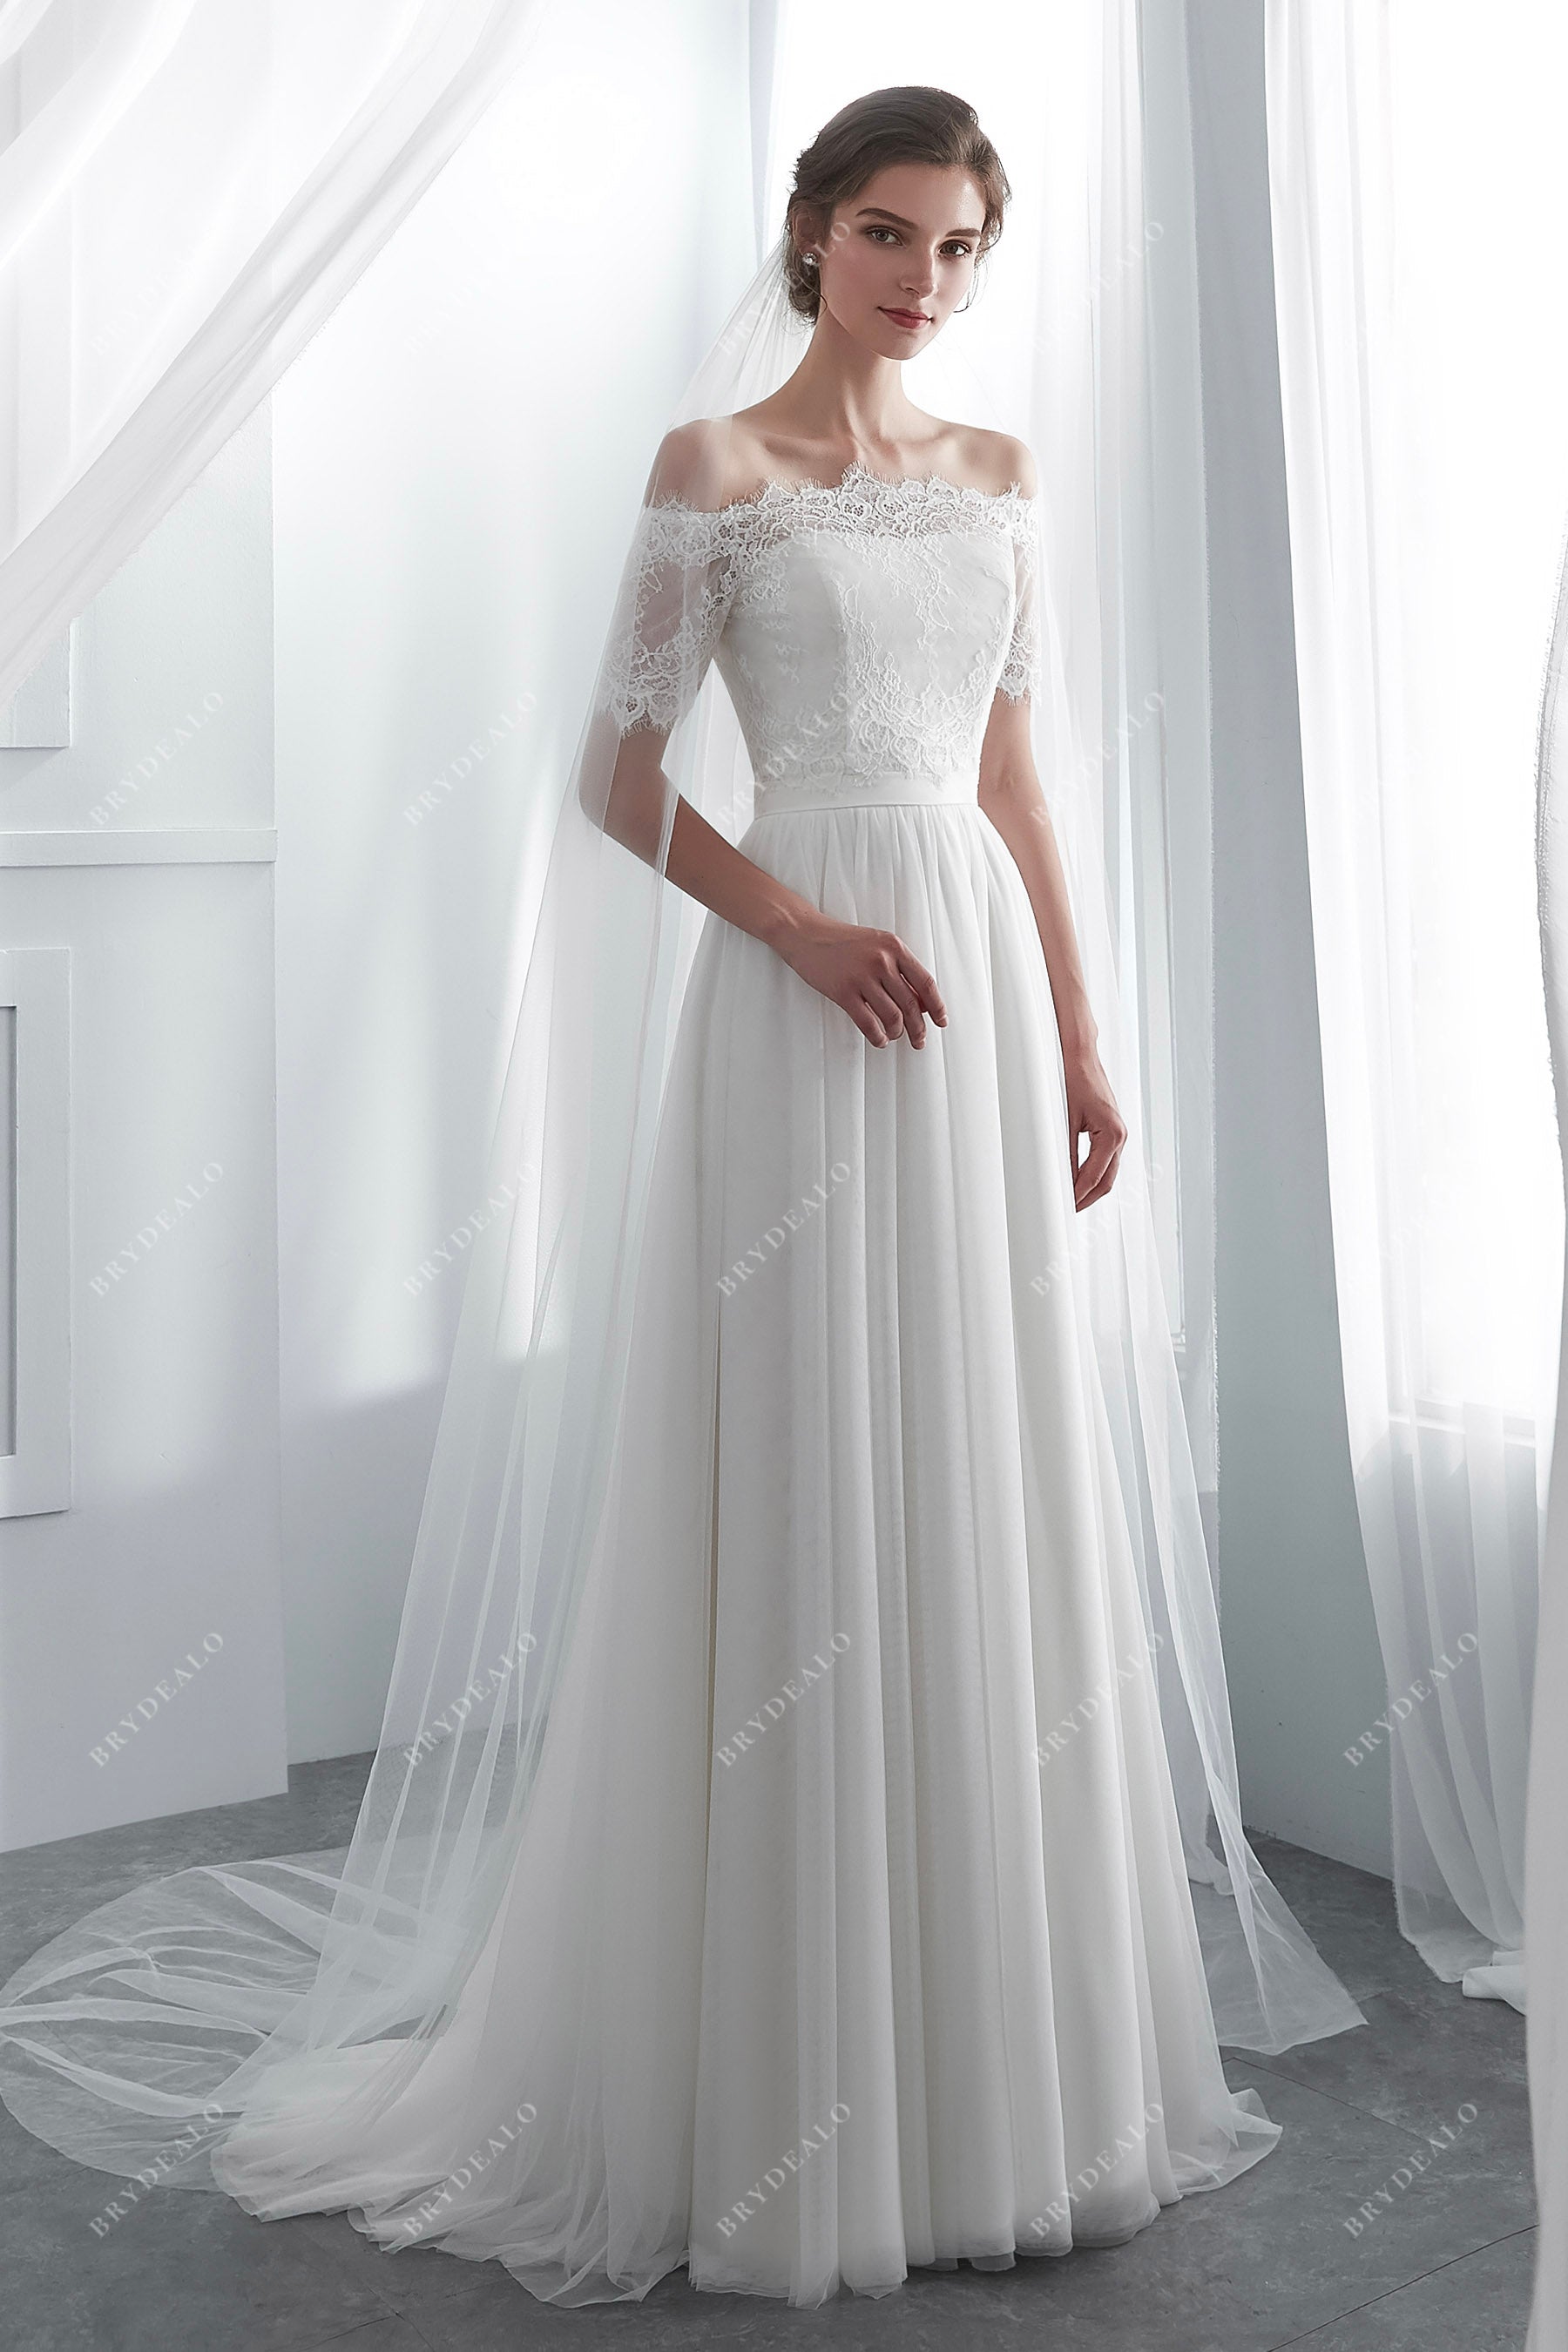 Sample Sale | Ivory Lace Net A-line Bridal Gown with Bolero